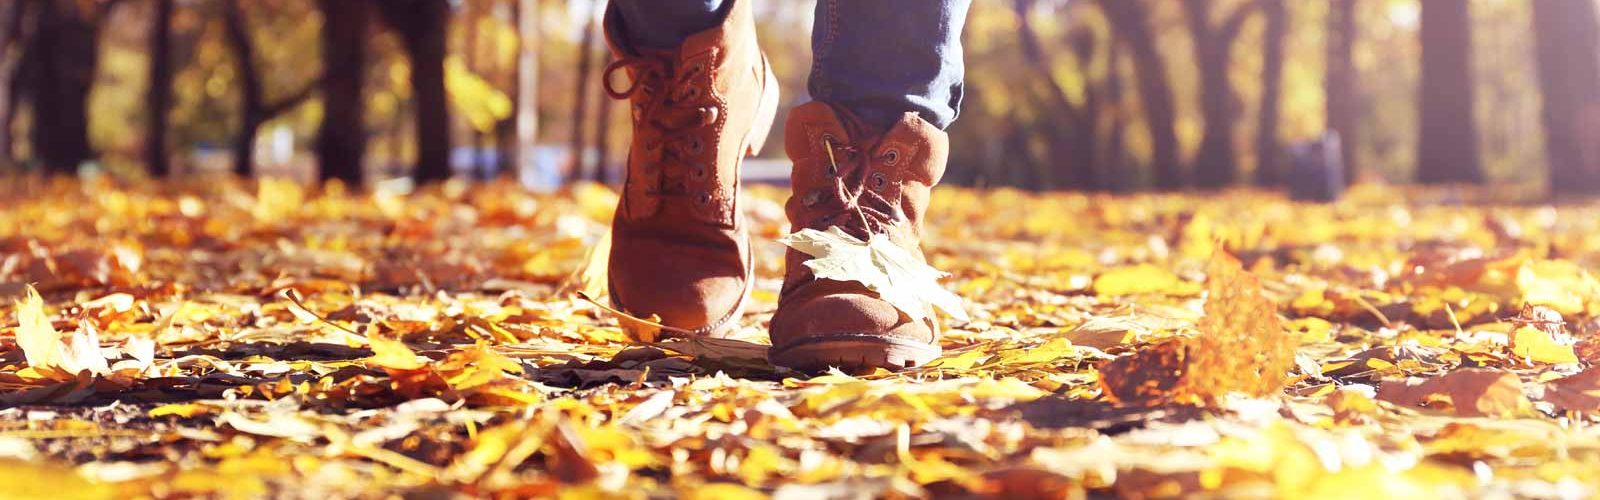 Close up of feet in boots walking on autumn leaves in a park